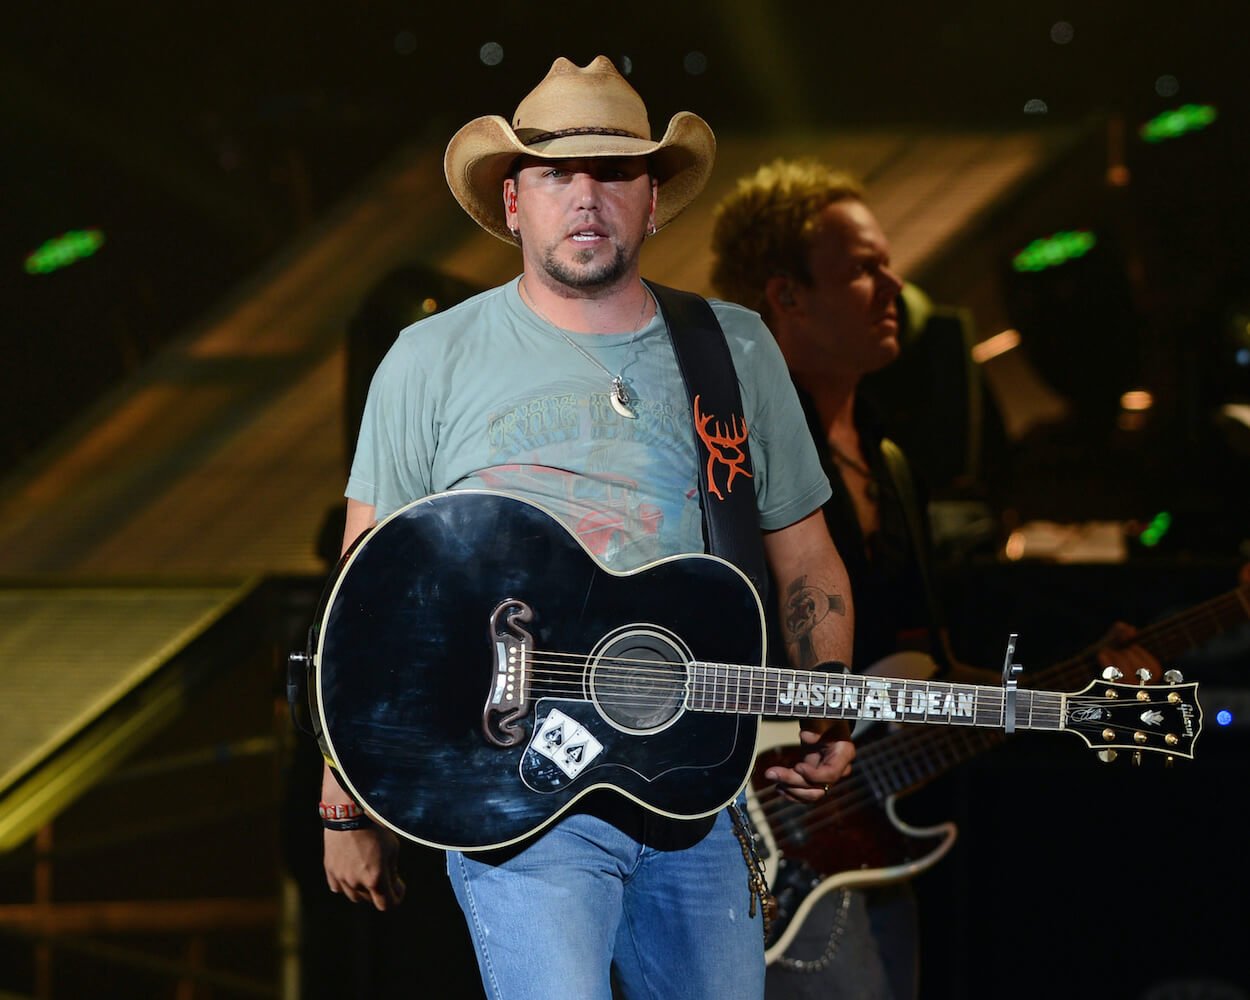 Jason Aldean with an acoustic guitar slung around his neck at a 2012 concert.